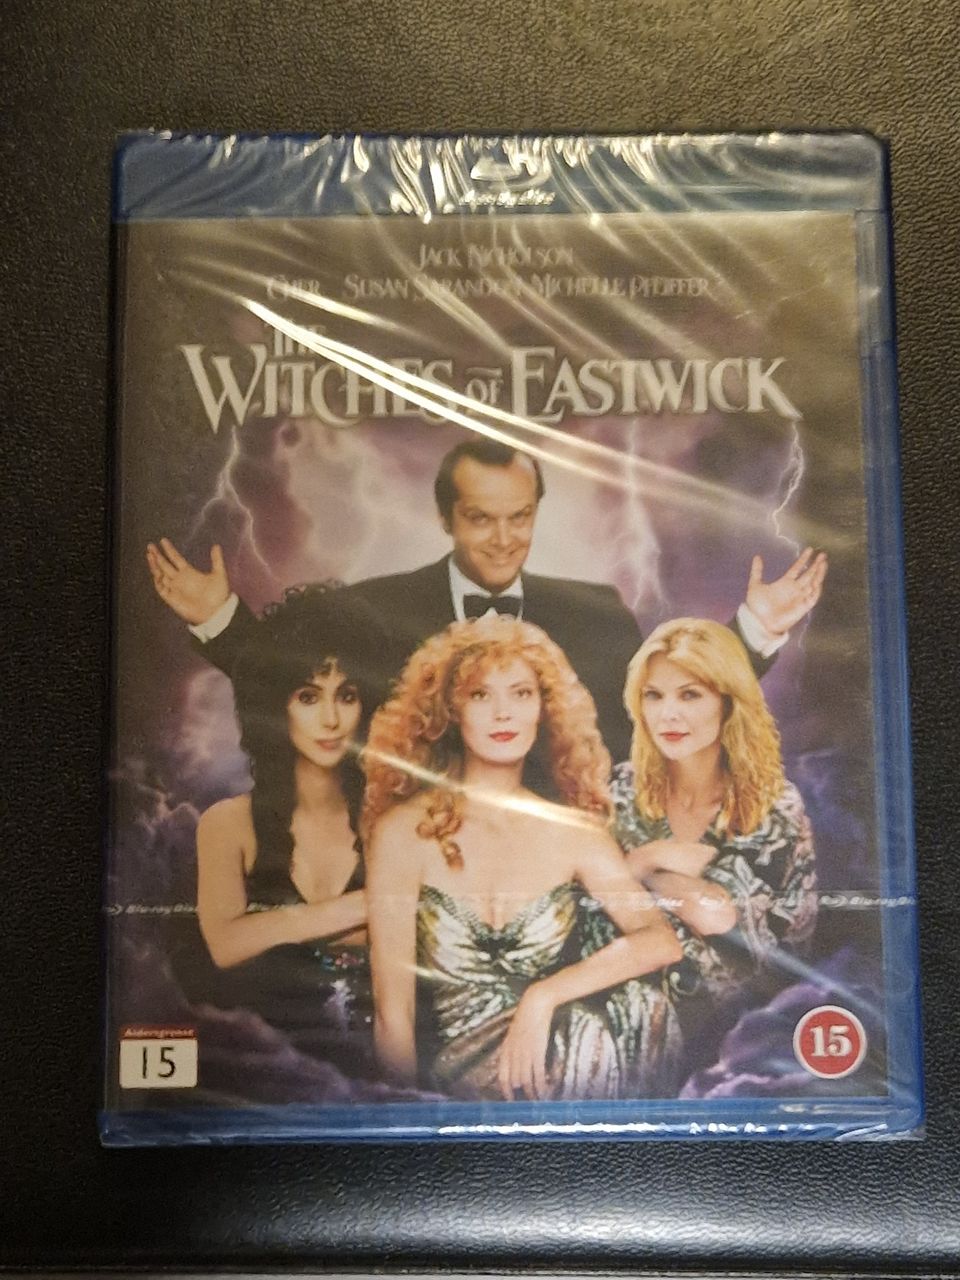 The Witches of Eastwick - Bluray